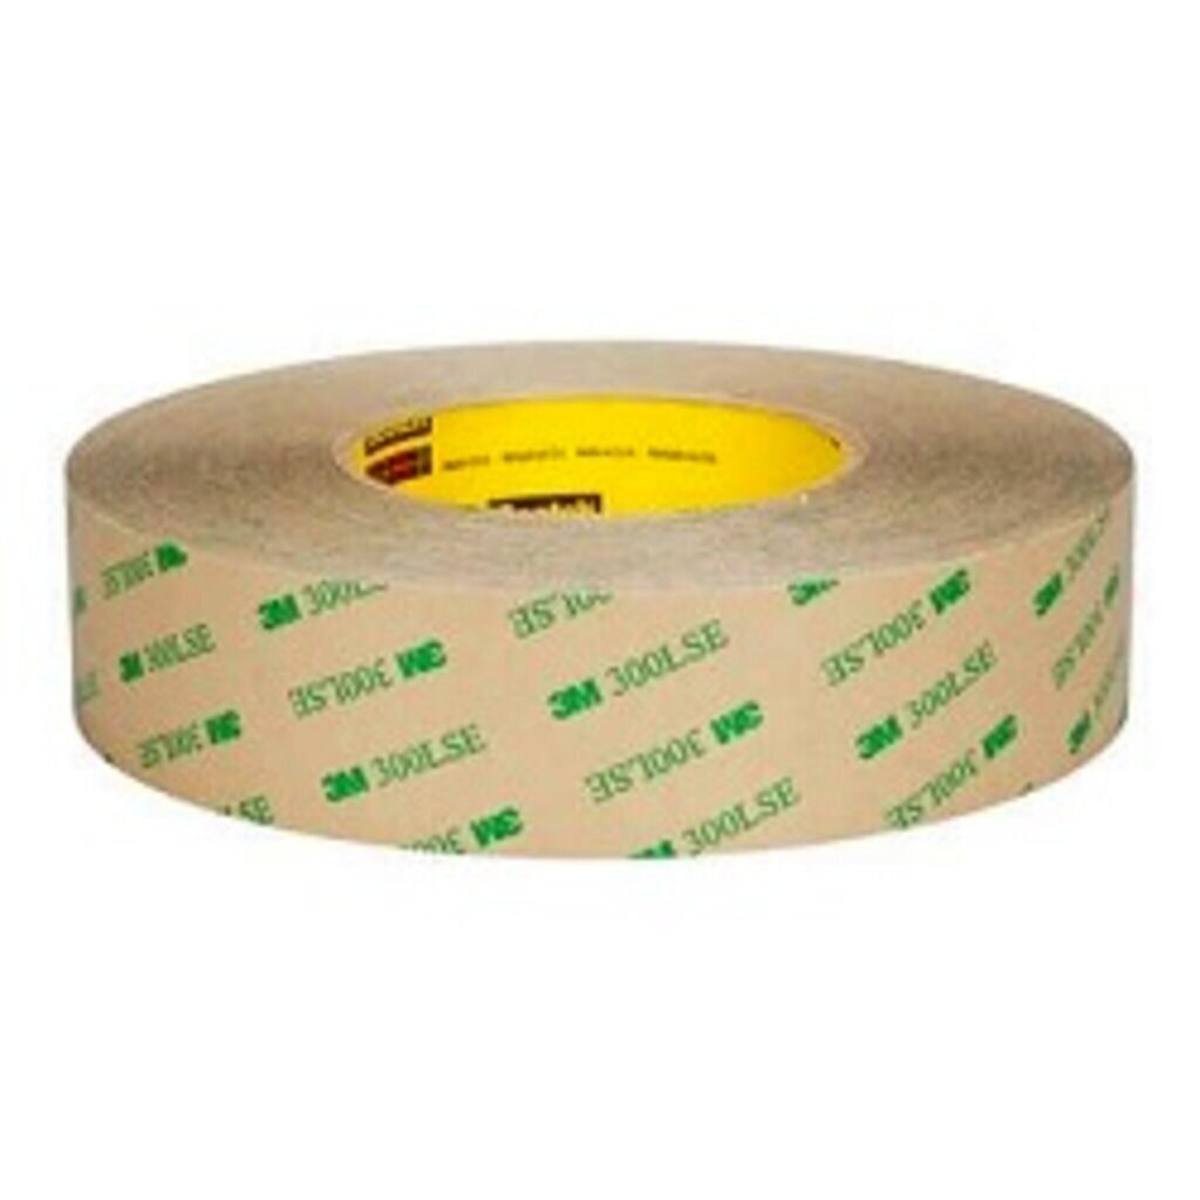 3M Double-sided adhesive tape with polyester backing 9474LE, transparent, 610 mm x 0.914 m, 0.17 mm